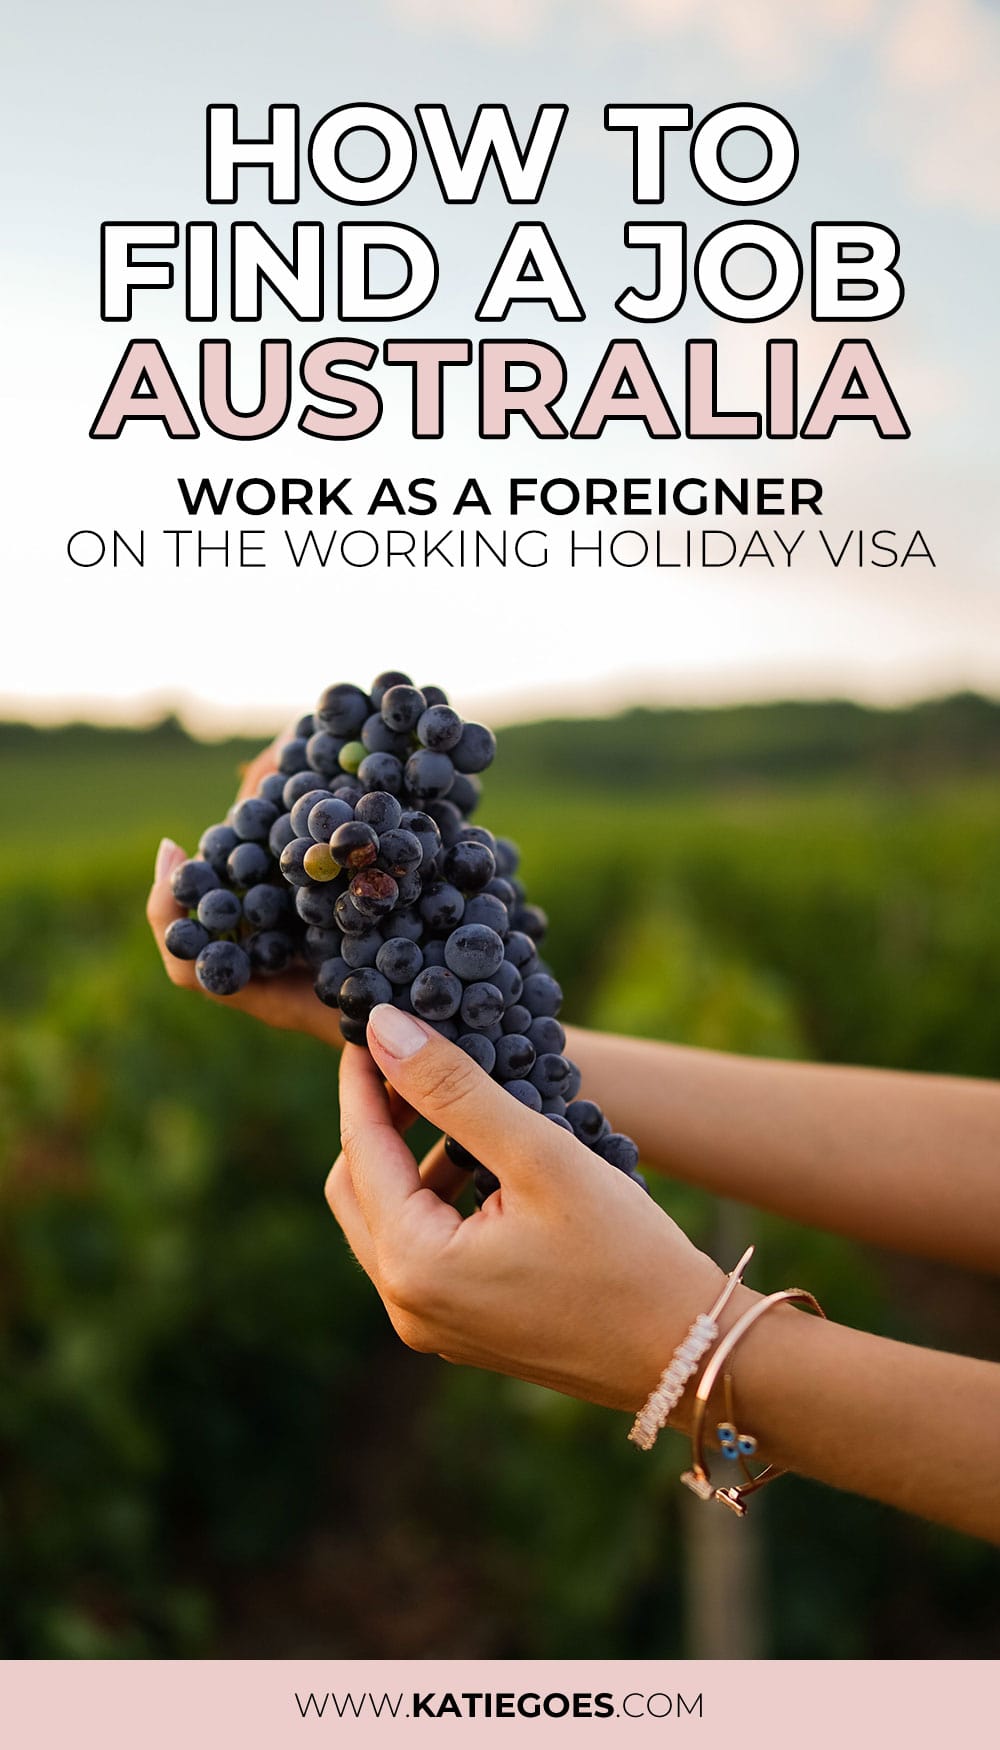 How to Find a Job in Australia: Work as a Foreigner on the Working Holiday Visa